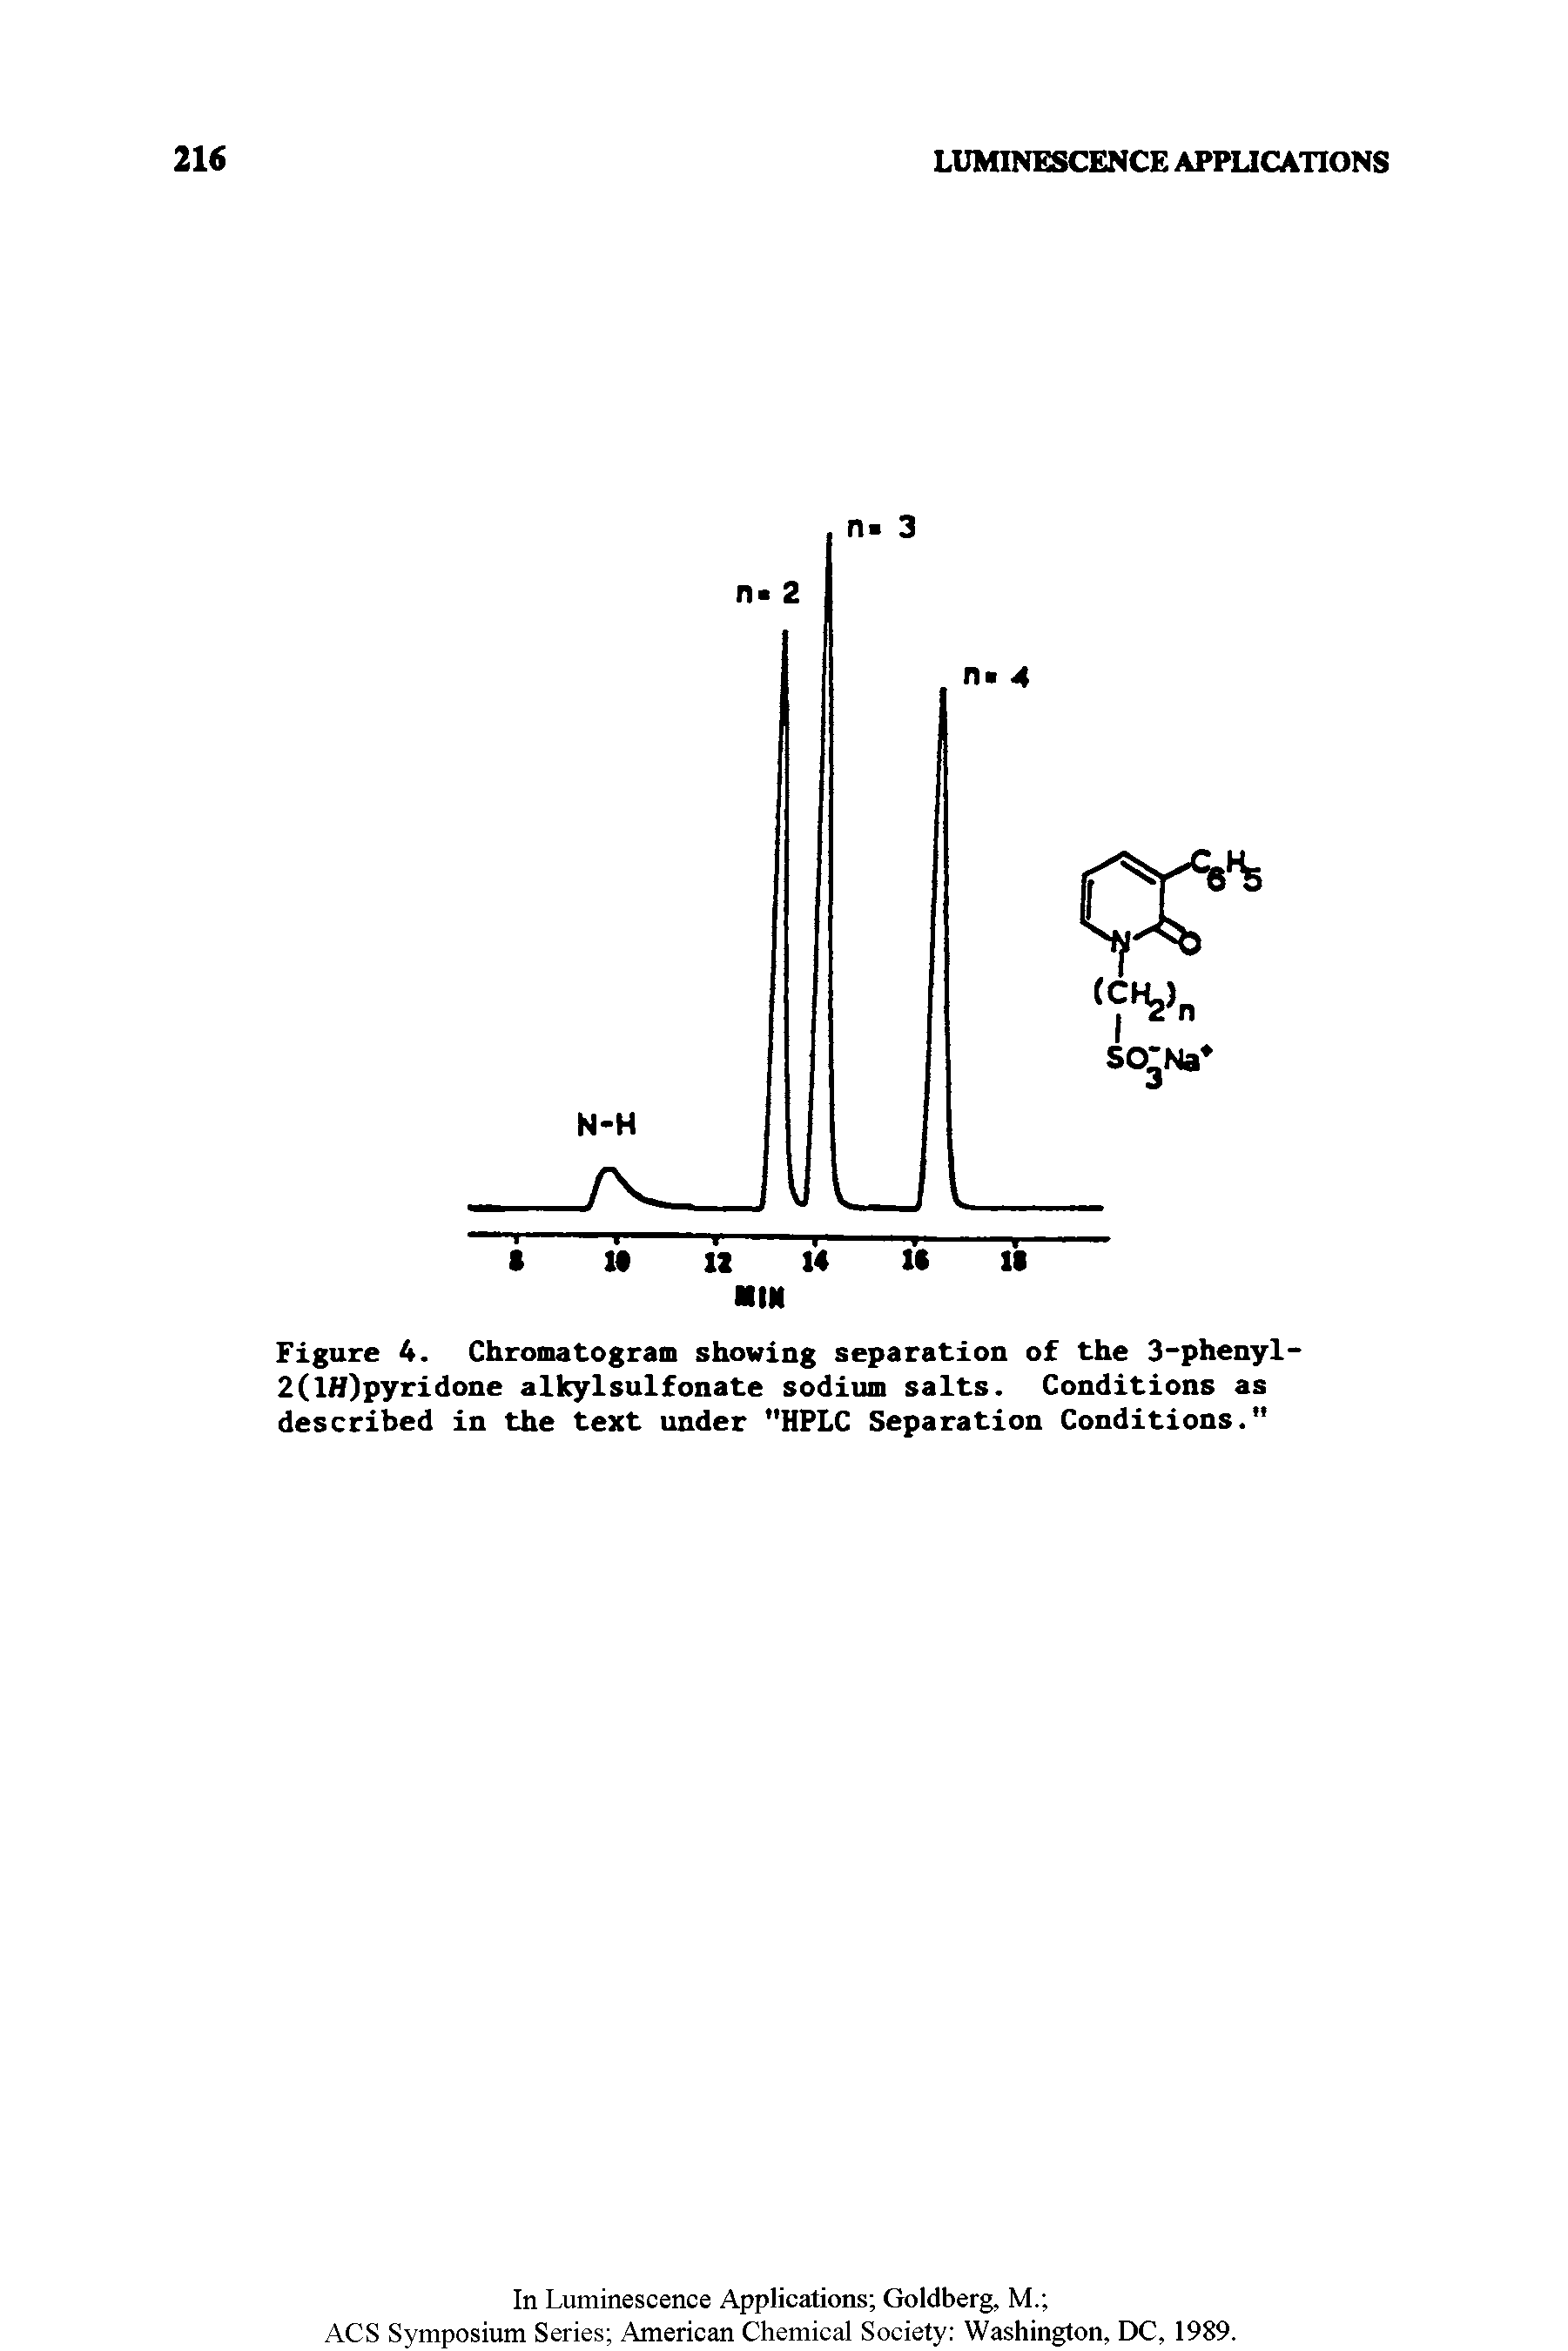 Figure 4. Chromatogram showing separation of the 3-phenyl-2(lH)pyridone alkylsulfonate sodium salts. Conditions as described in the text under "HPLC Separation Conditions."...